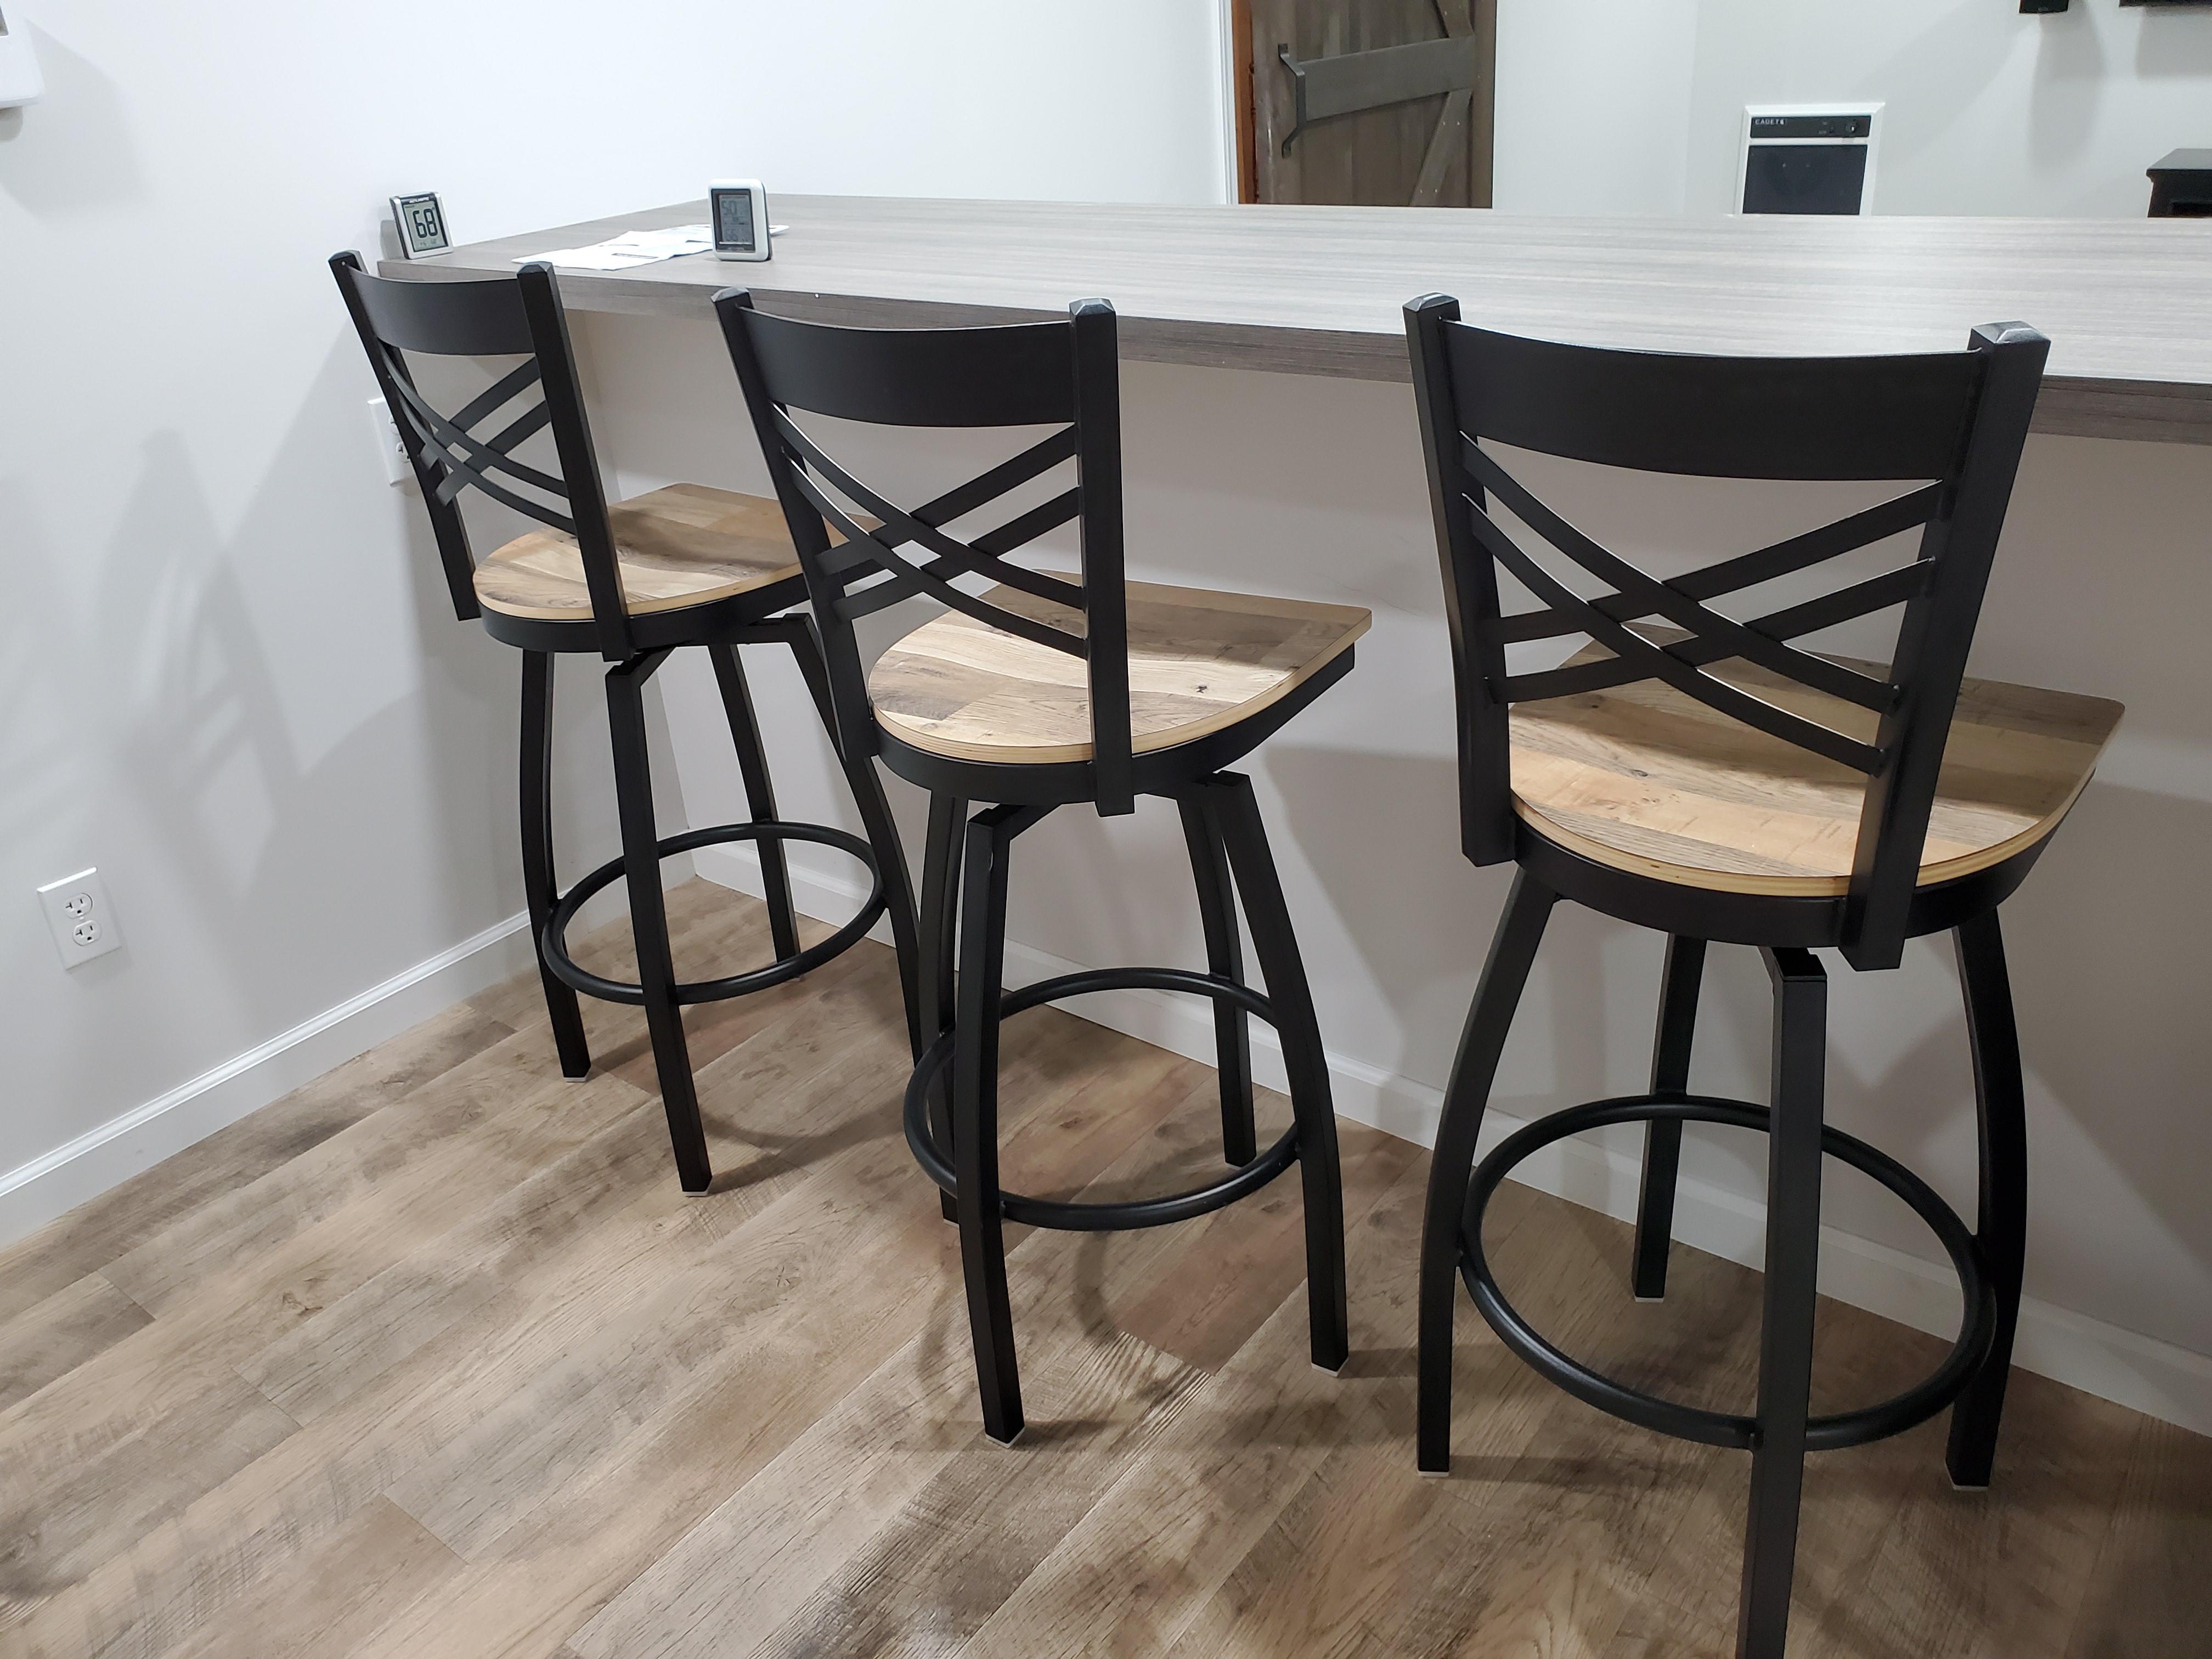 Stools look awesome in bar area!